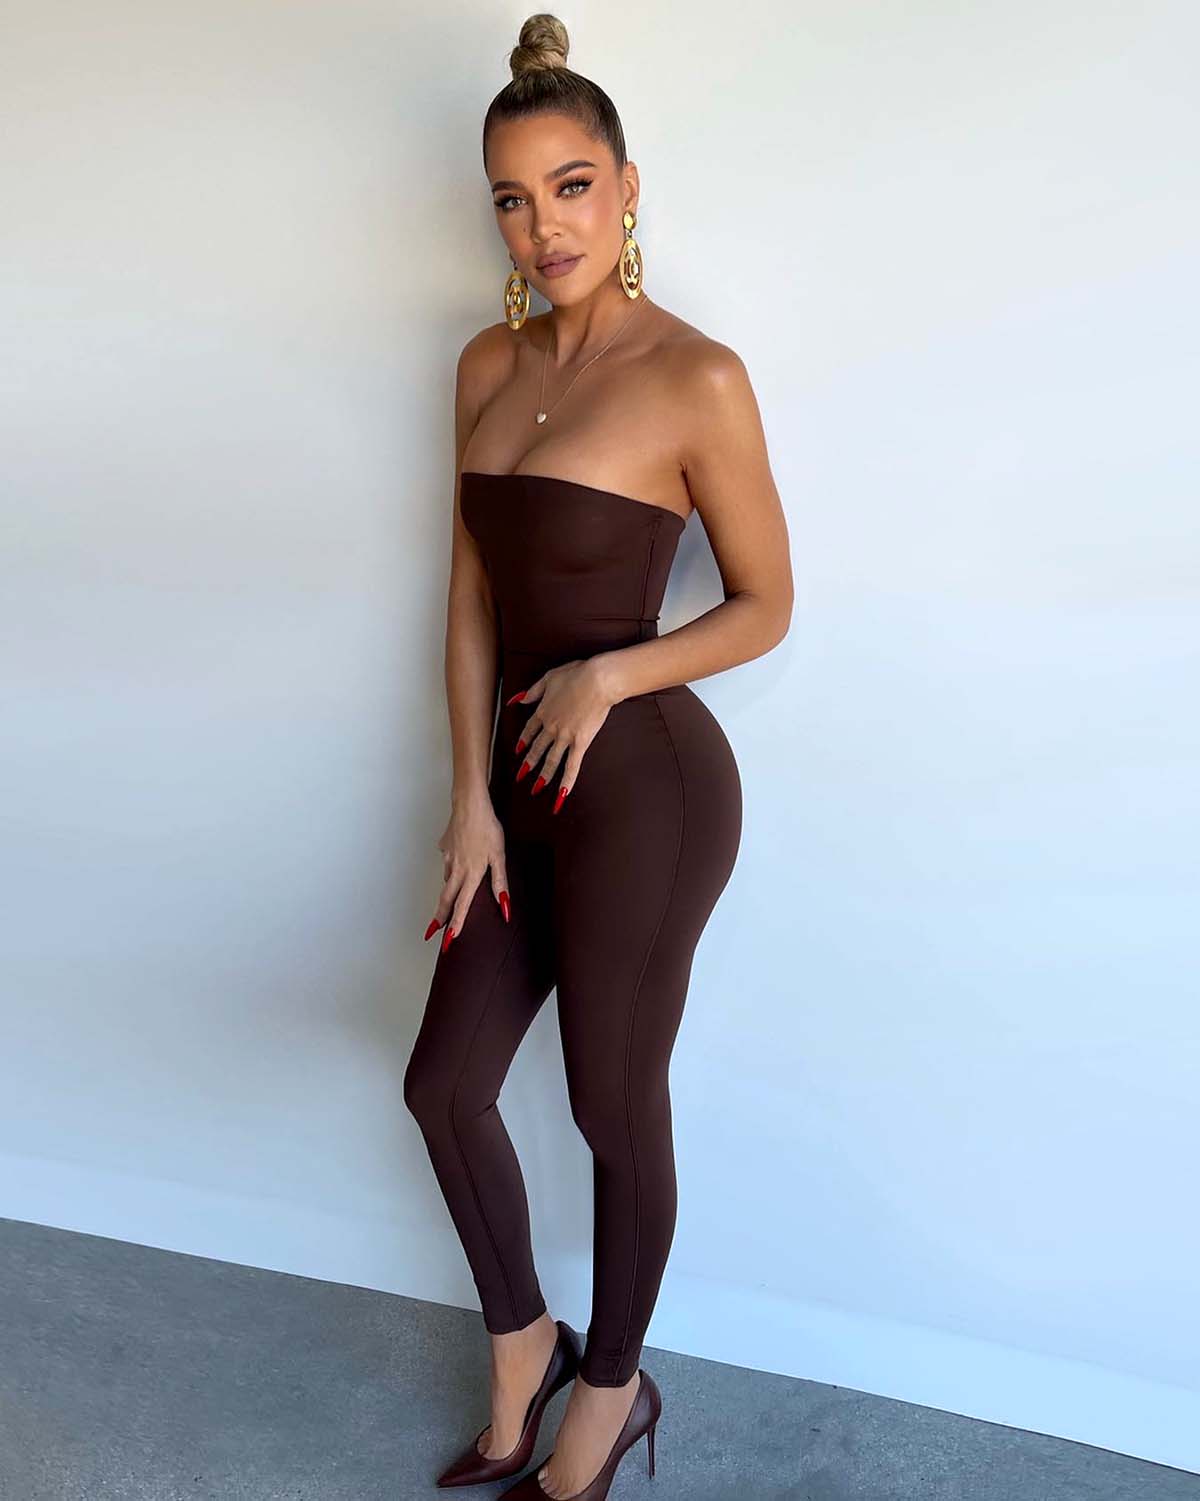 Kylie Jenner shows off her curves in a tight catsuit with her